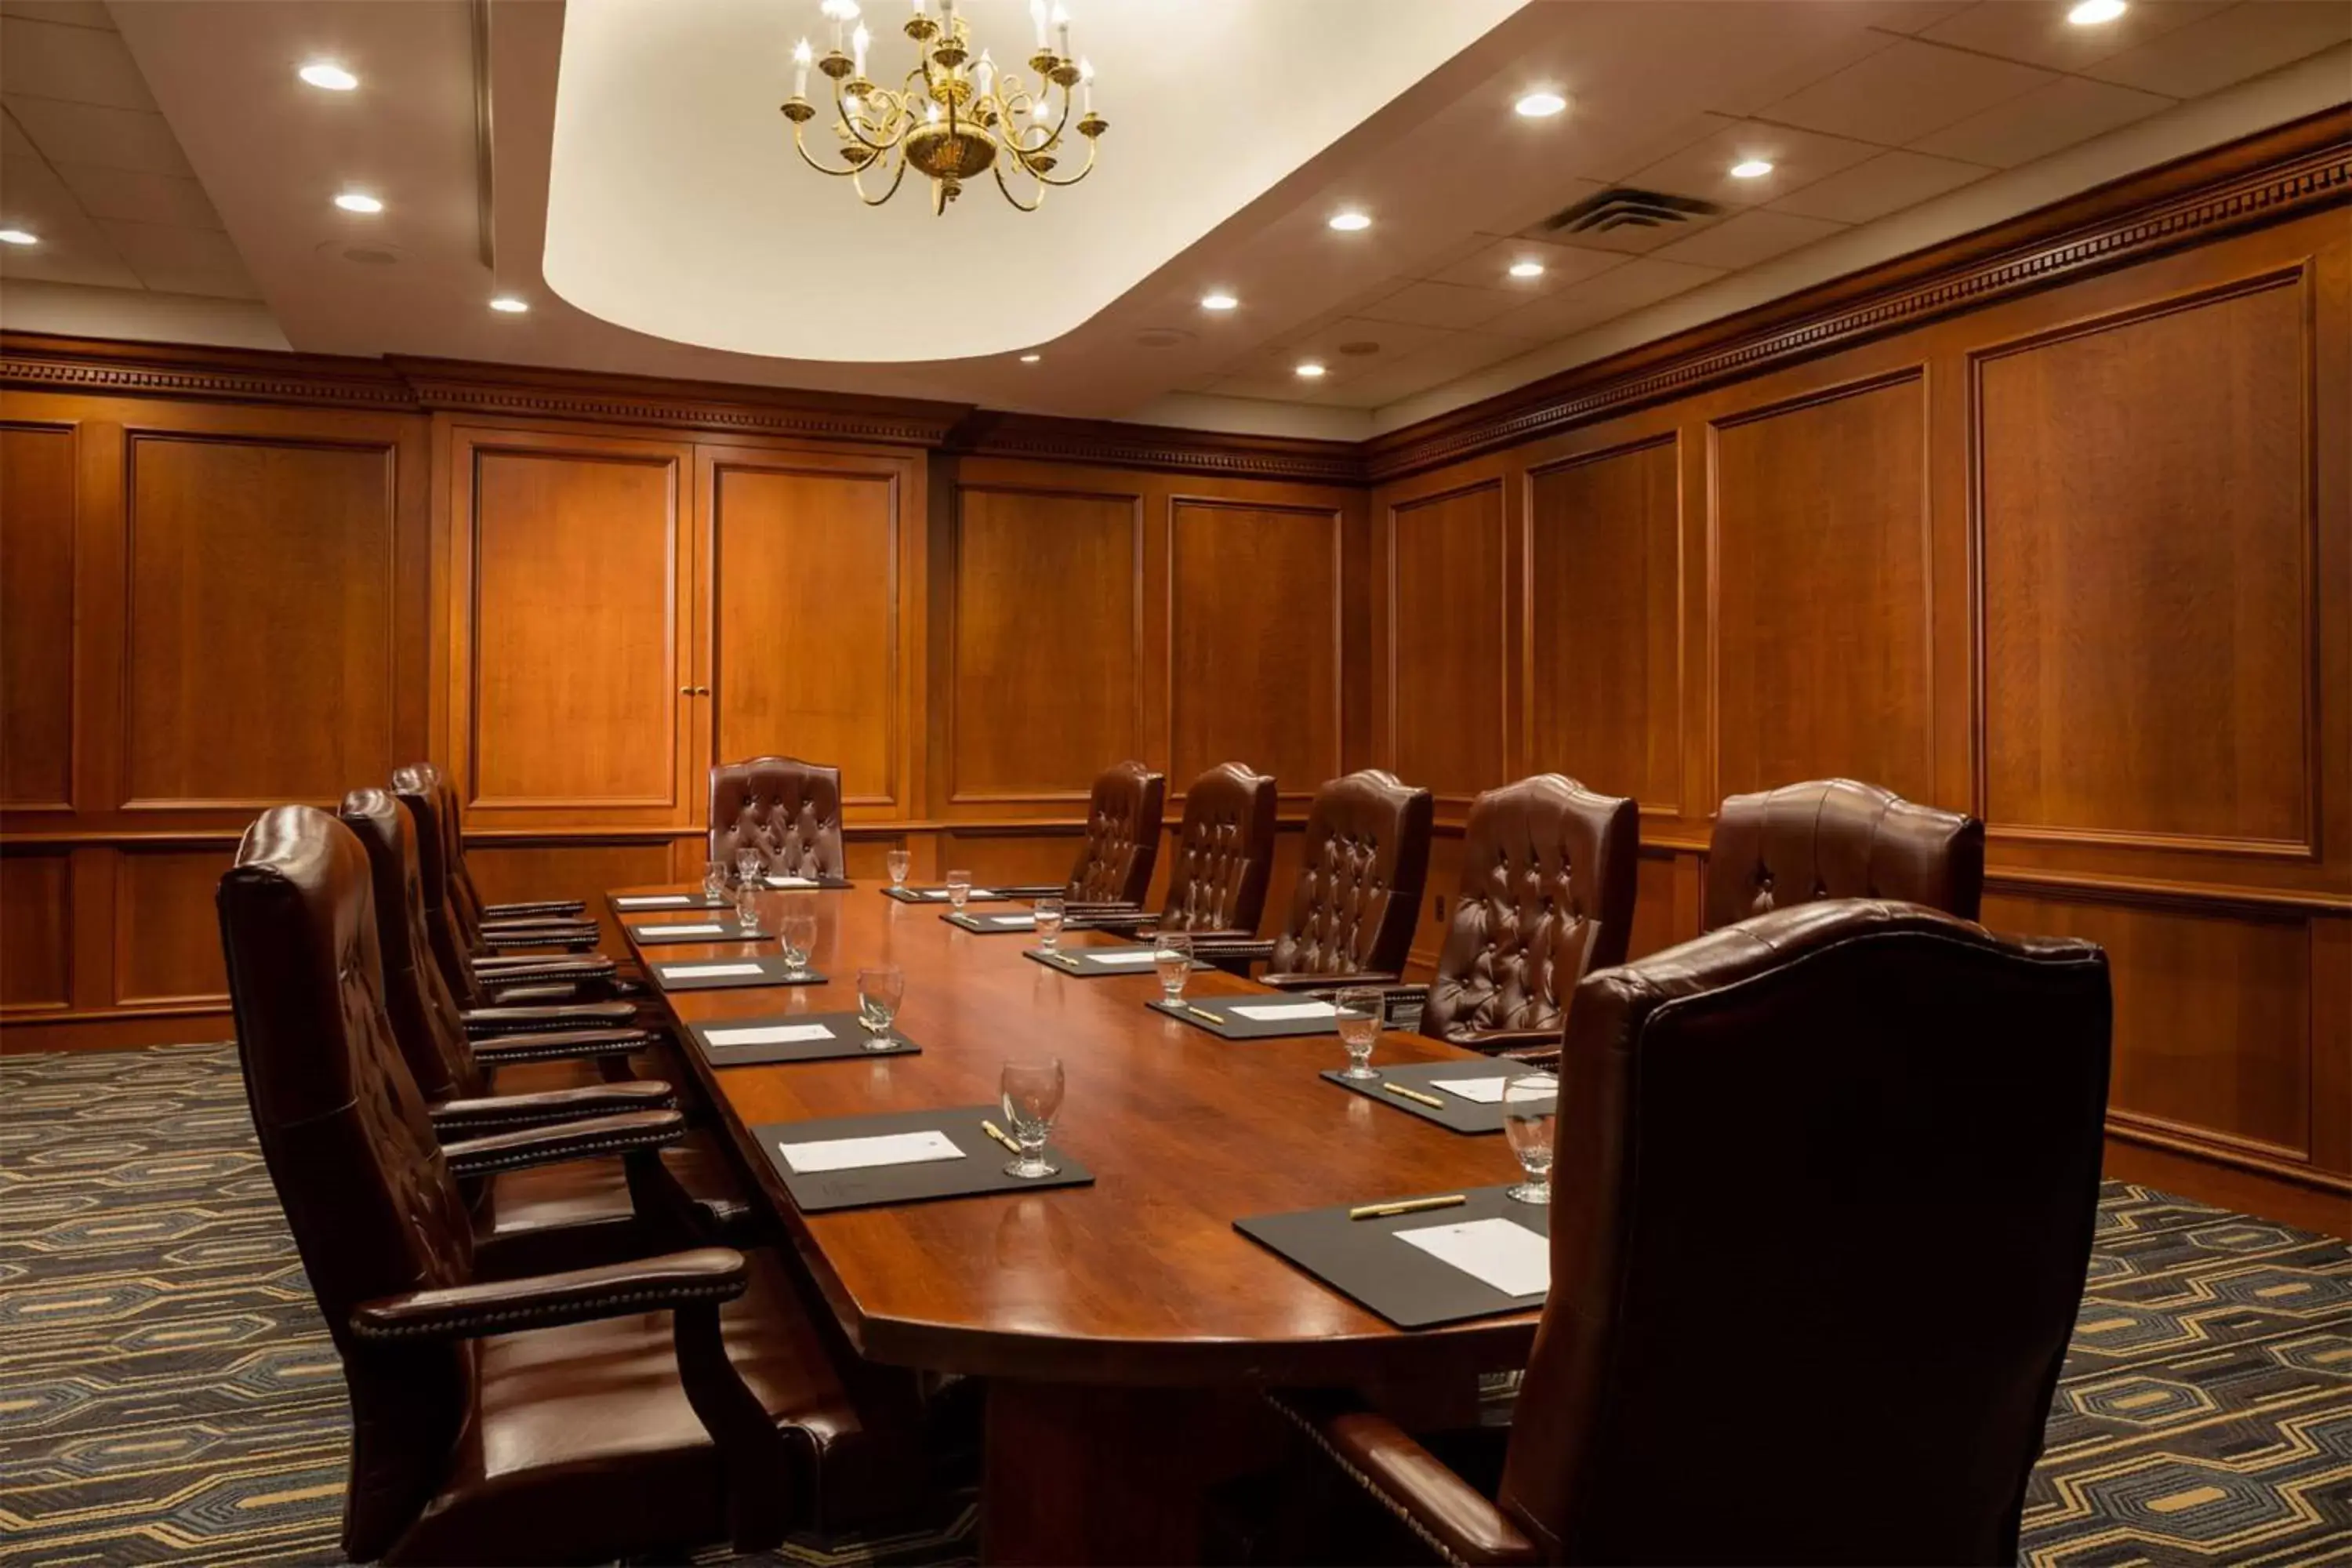 Meeting/conference room in Doubletree by Hilton, Leominster